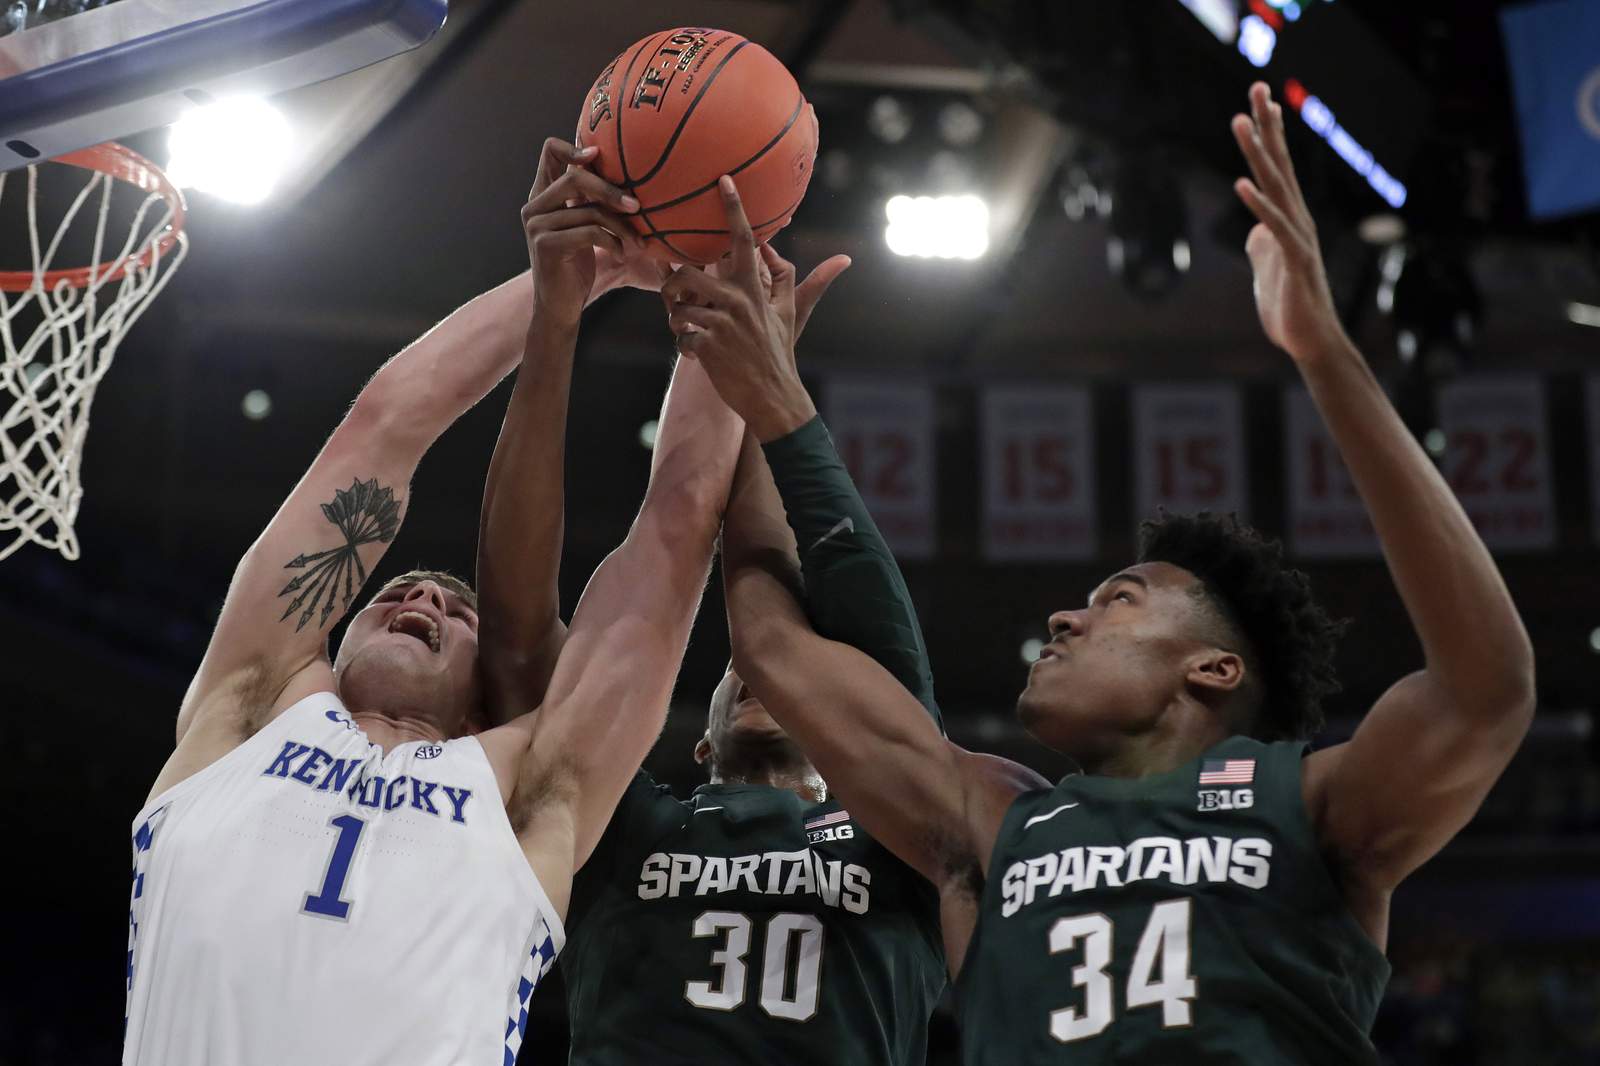 Maxey leads No. 2 Kentucky past No. 1 Michigan State 69-62